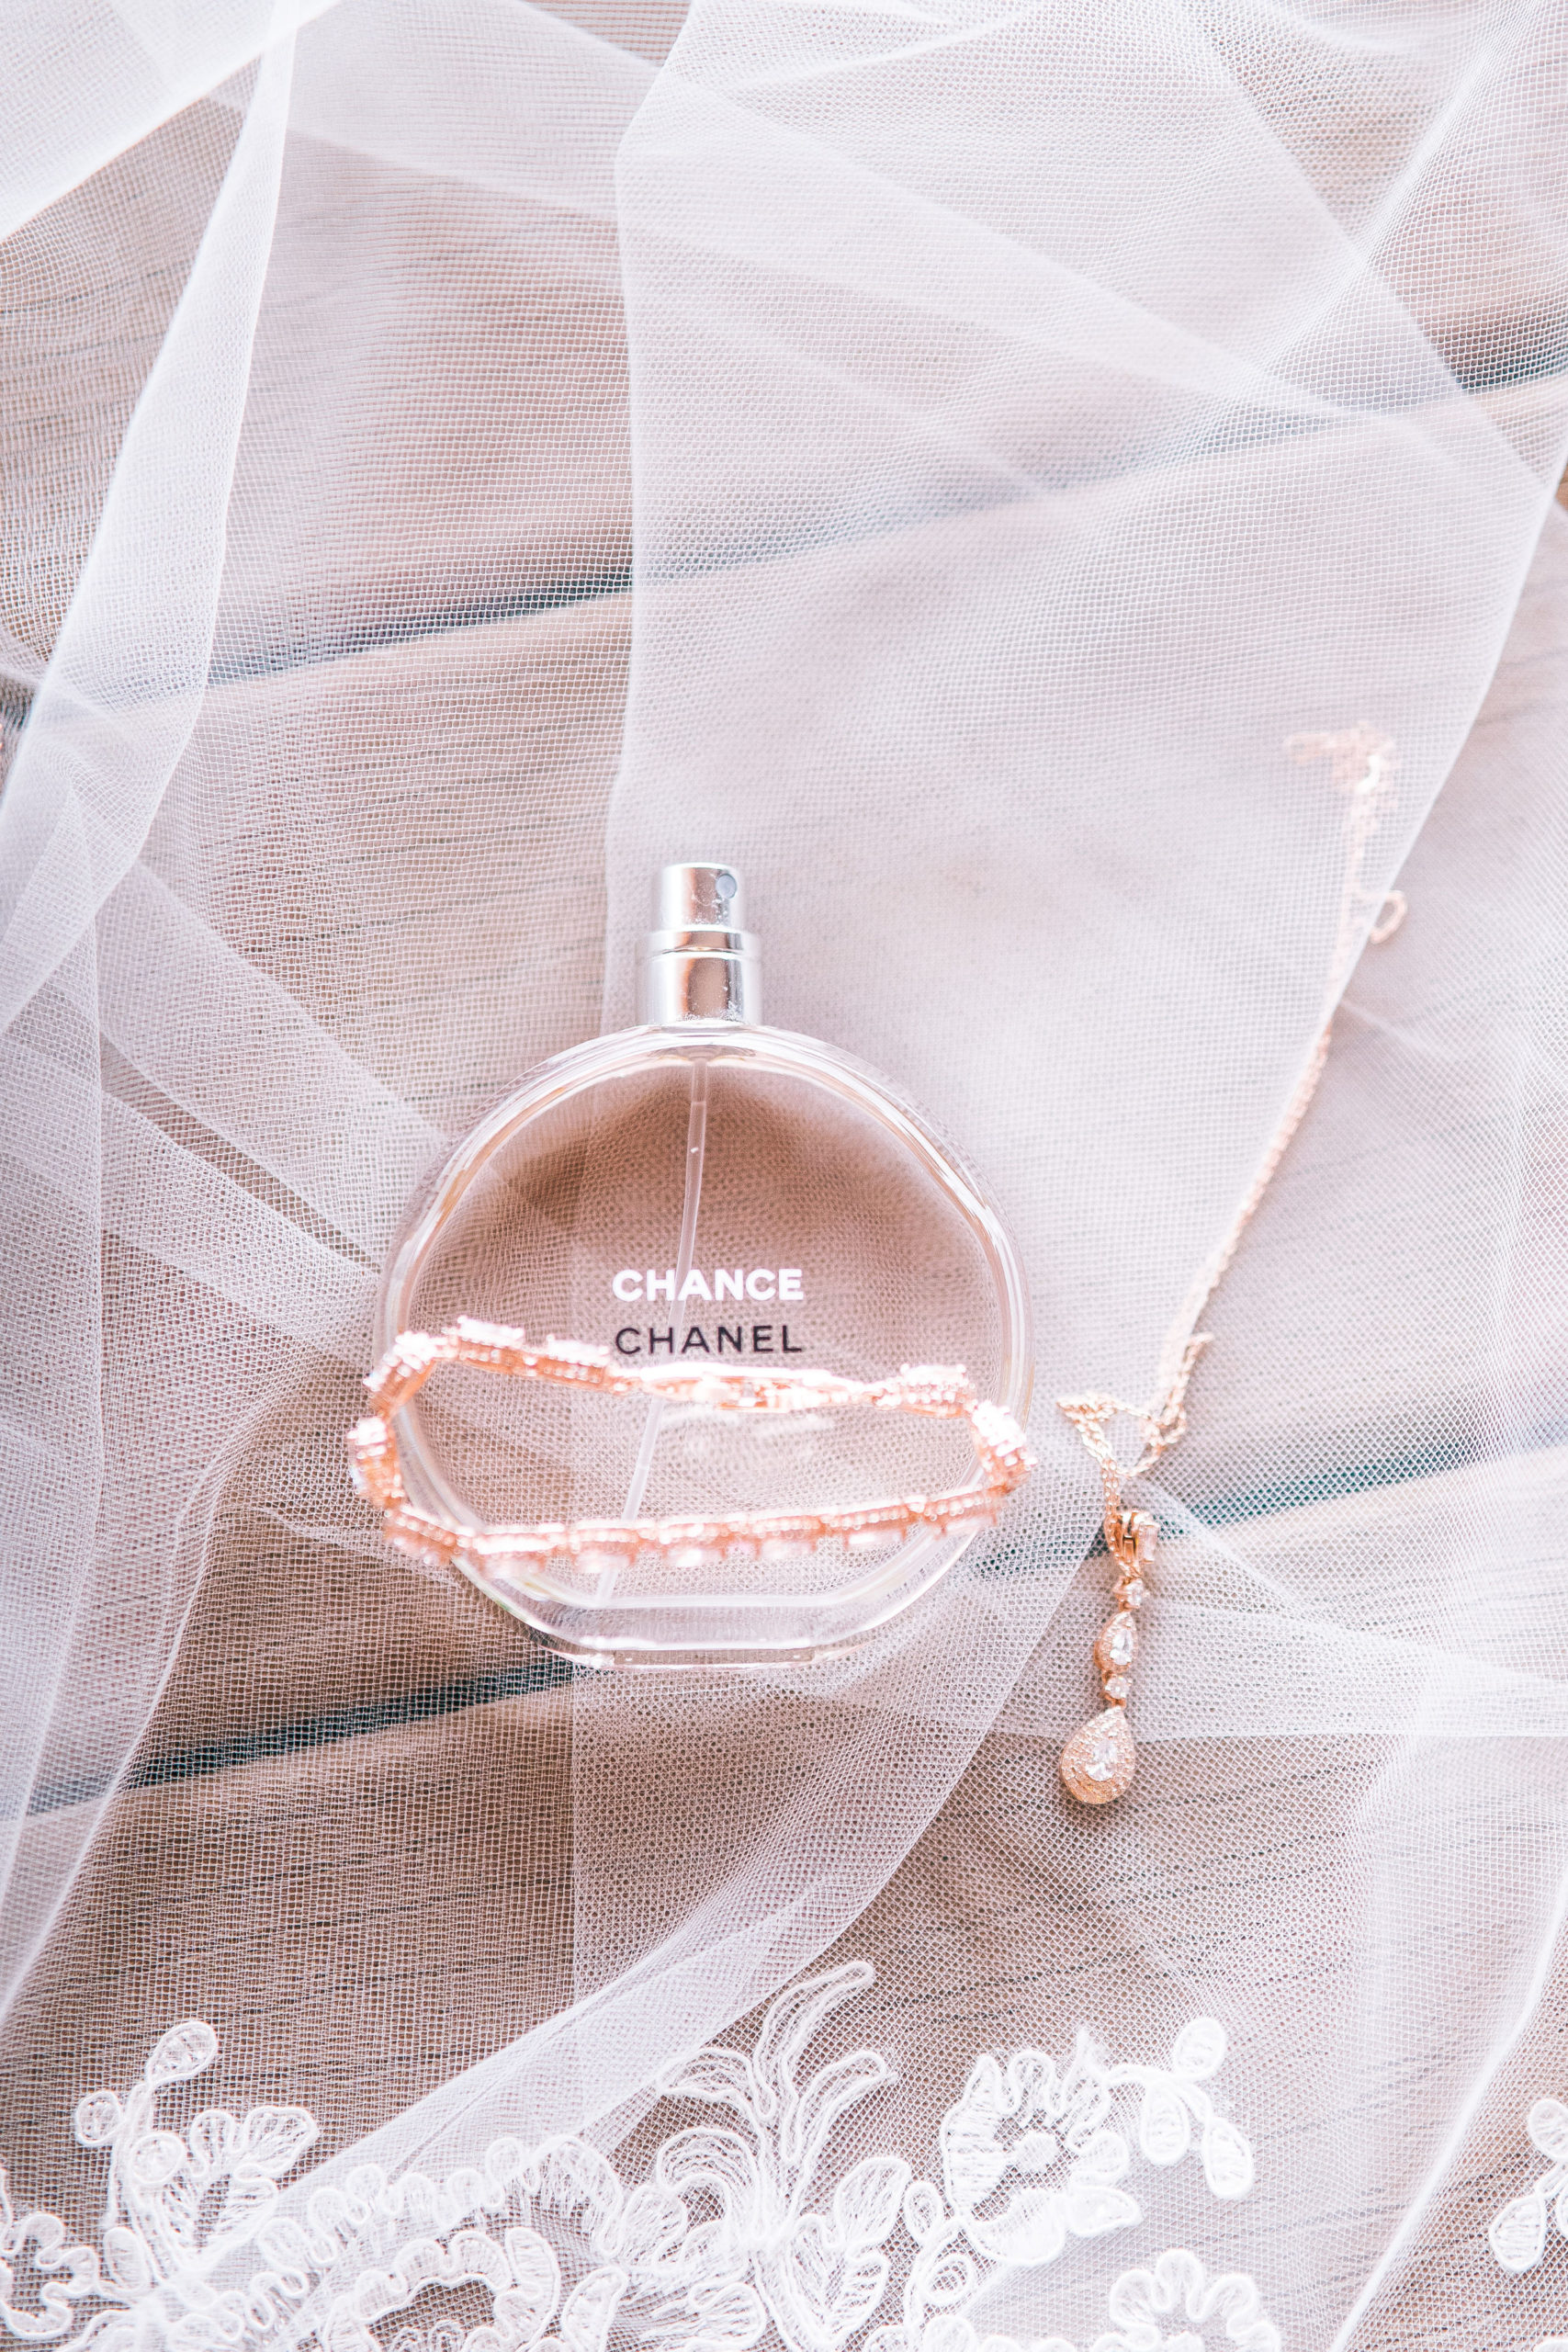 brides perfume laying on top of her veil with her bracelet draped over the bottle